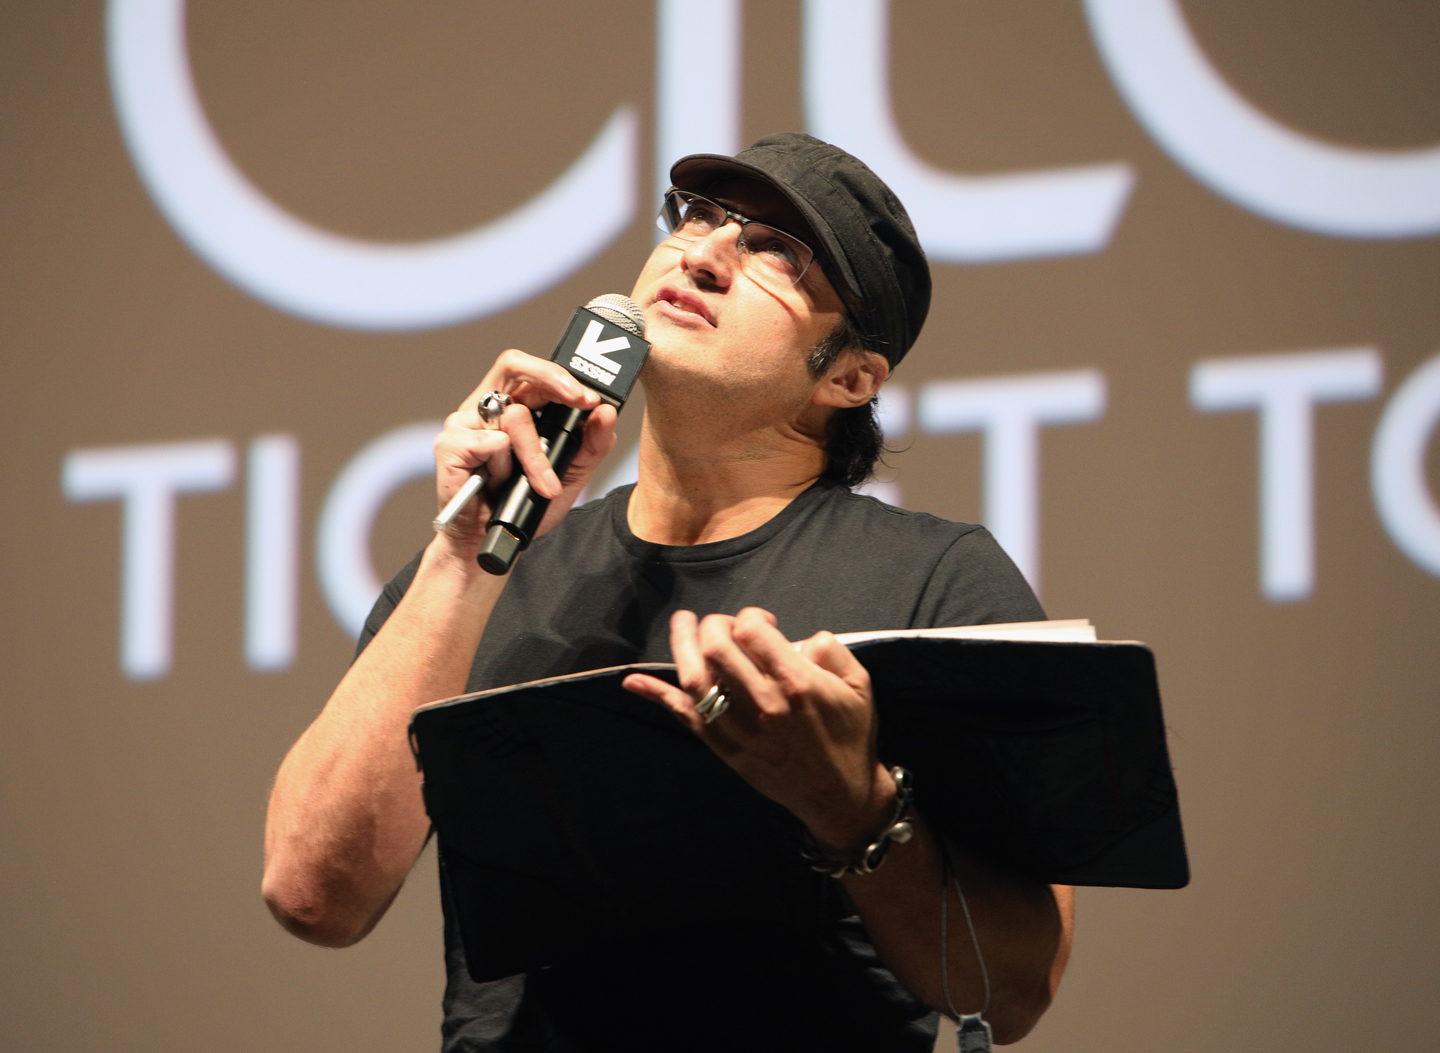 2019 SXSW The Robert Rodriguez Film School and Red 11 World Premiere – Photo by Mike Jordan/Getty Images for SXSW